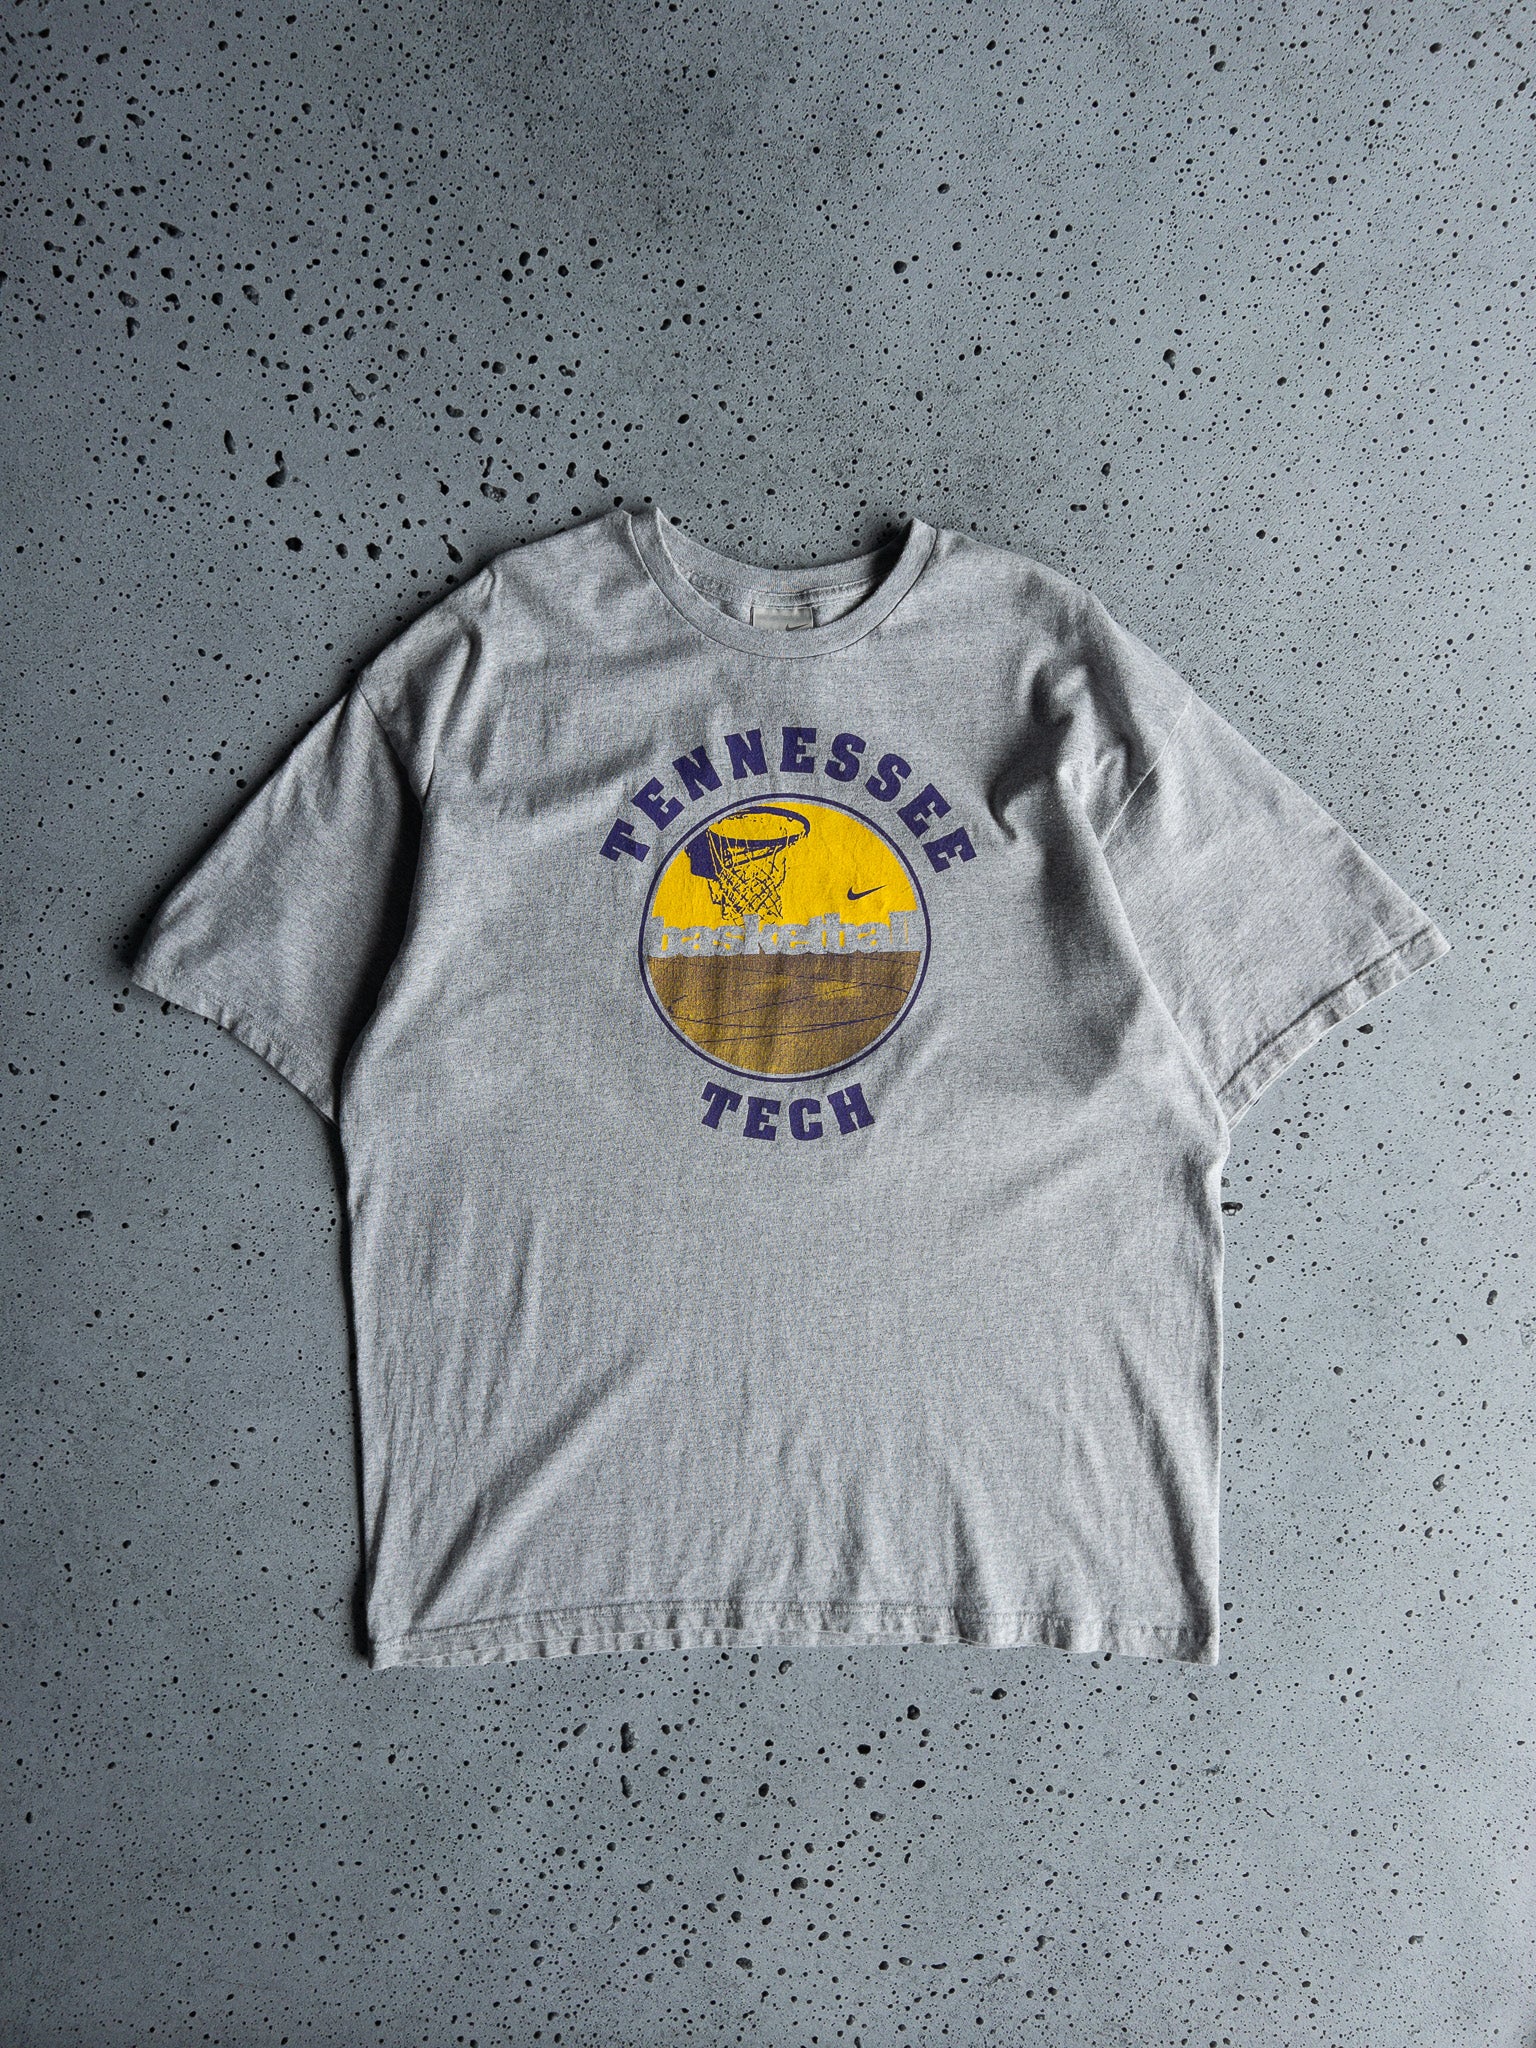 Vintage Tennessee Tech Tee (XL)